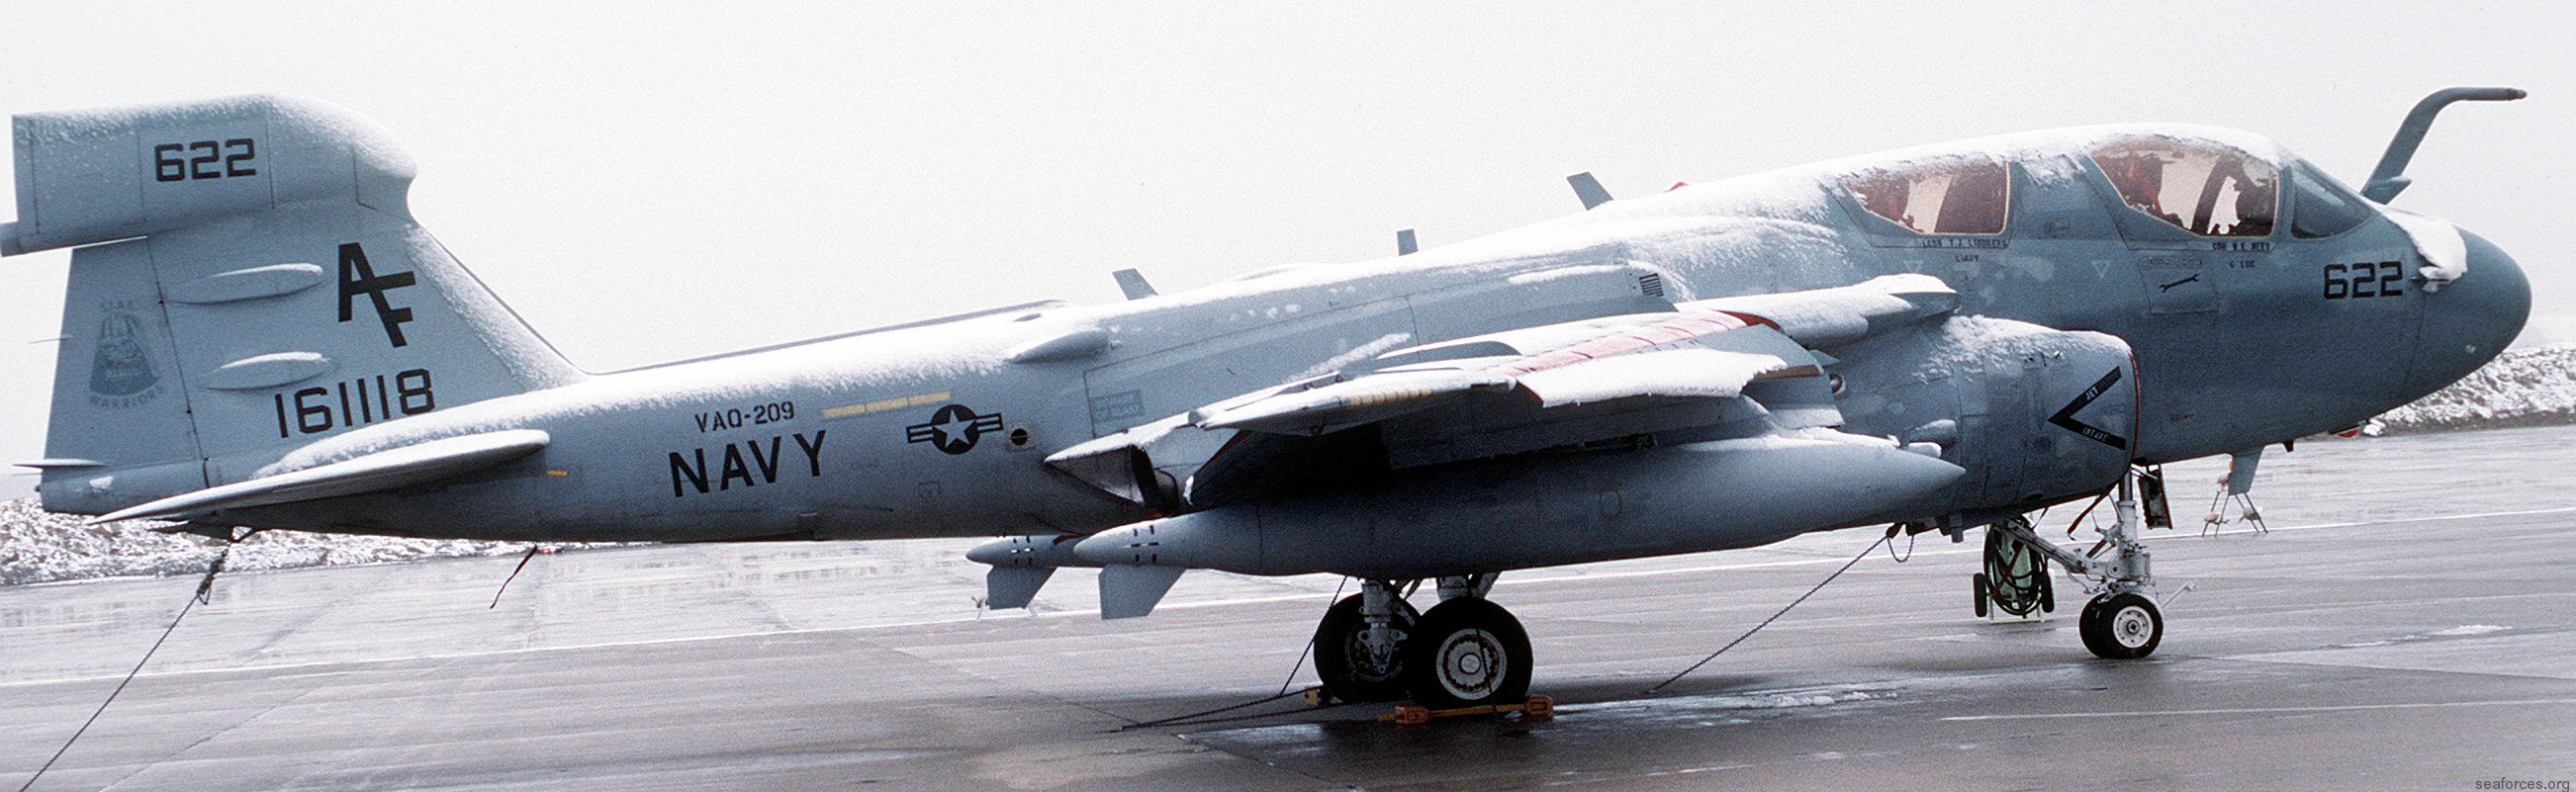 vaq-209 star warriors electronic attack squadron navy ea-6b prowler 36